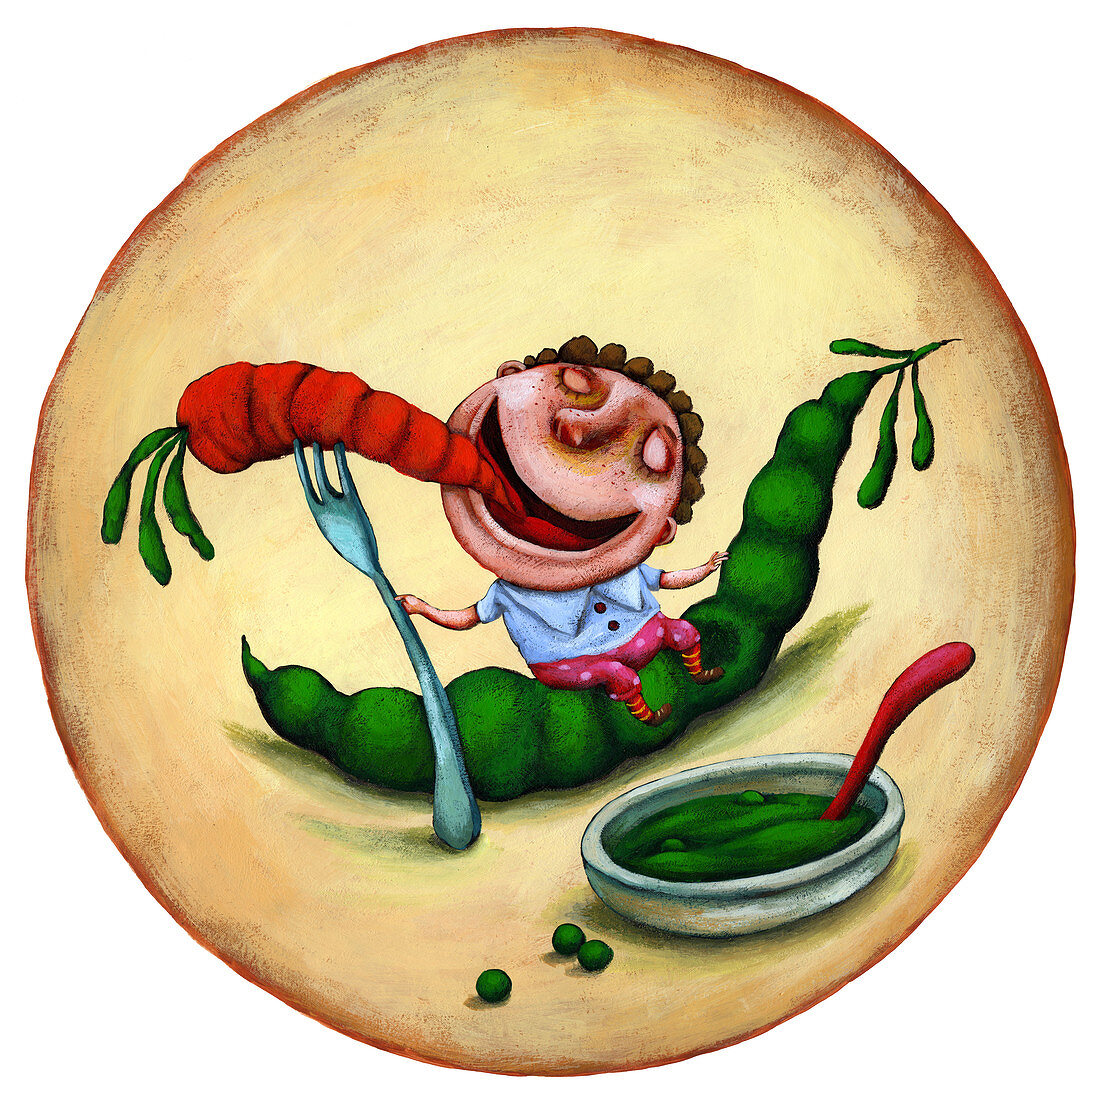 Illustration of boy eating carrot and peas